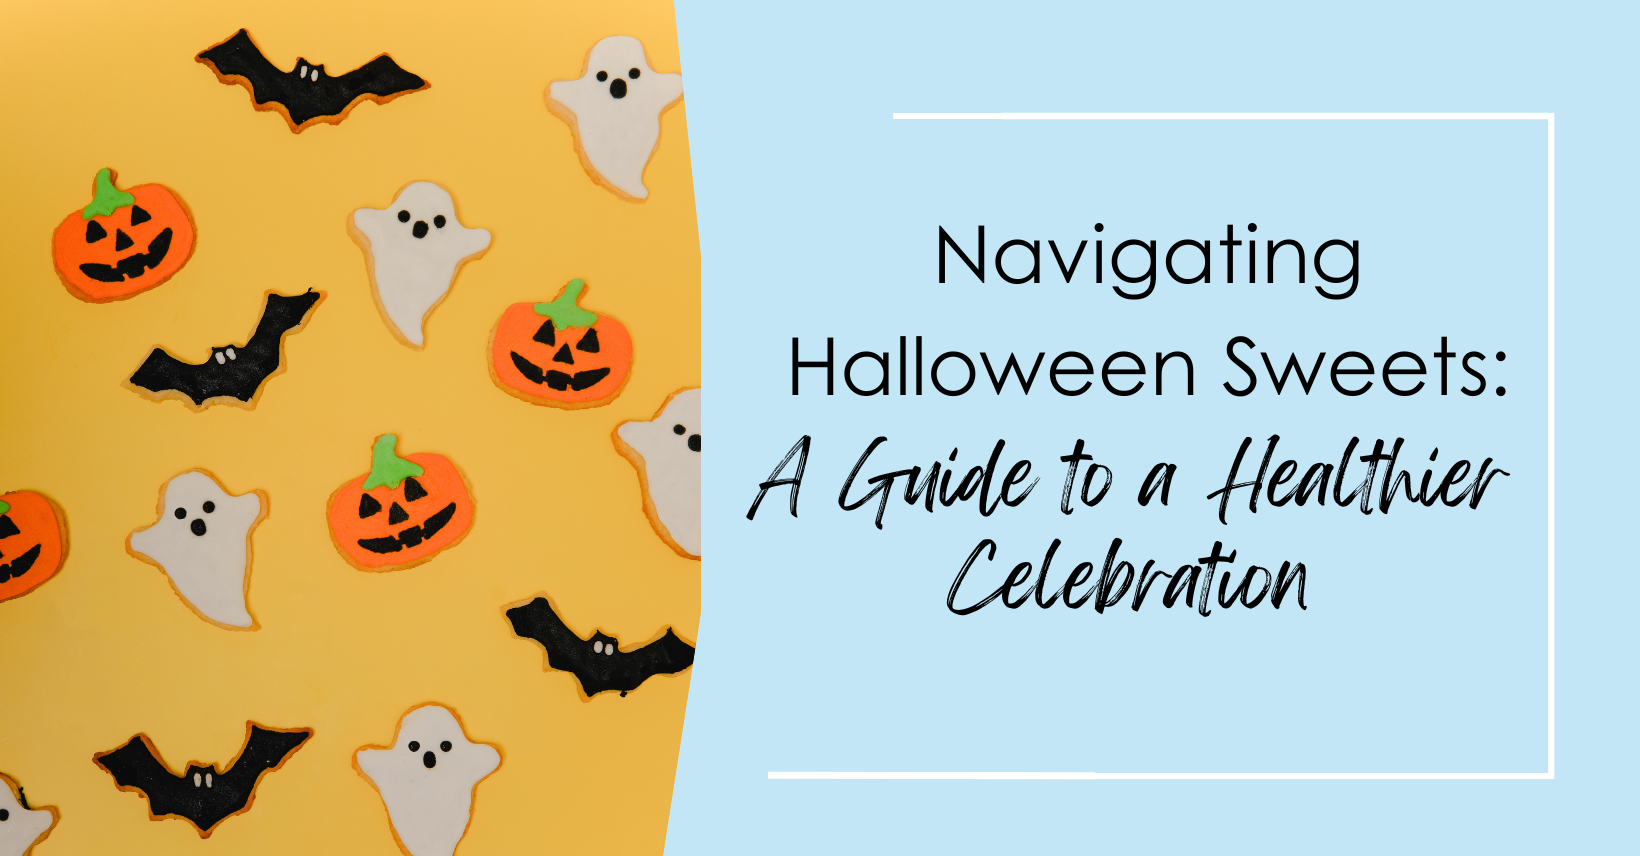 Navigating Halloween Sweets: A Guide to a Healthier Celebration